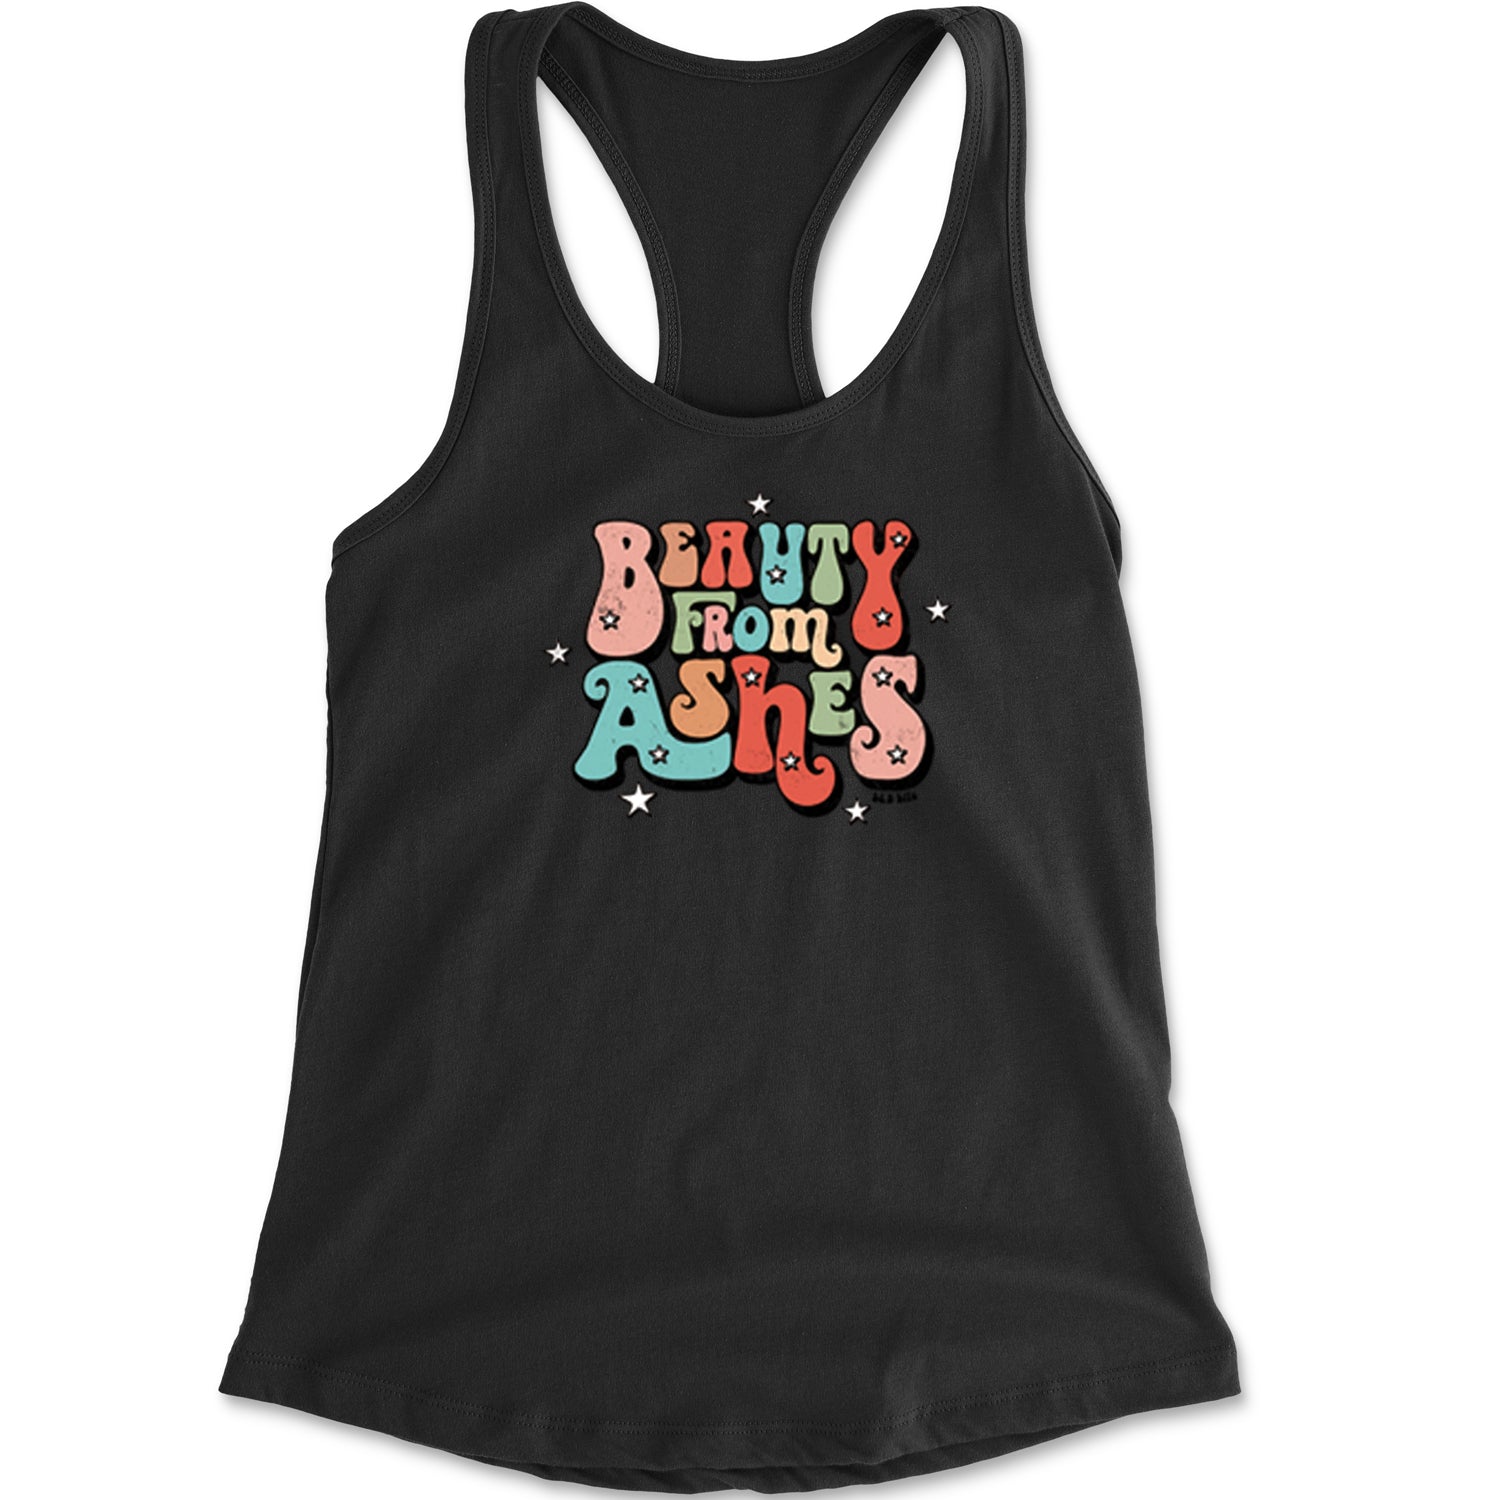 Beauty From Ashes Racerback Tank Top for Women